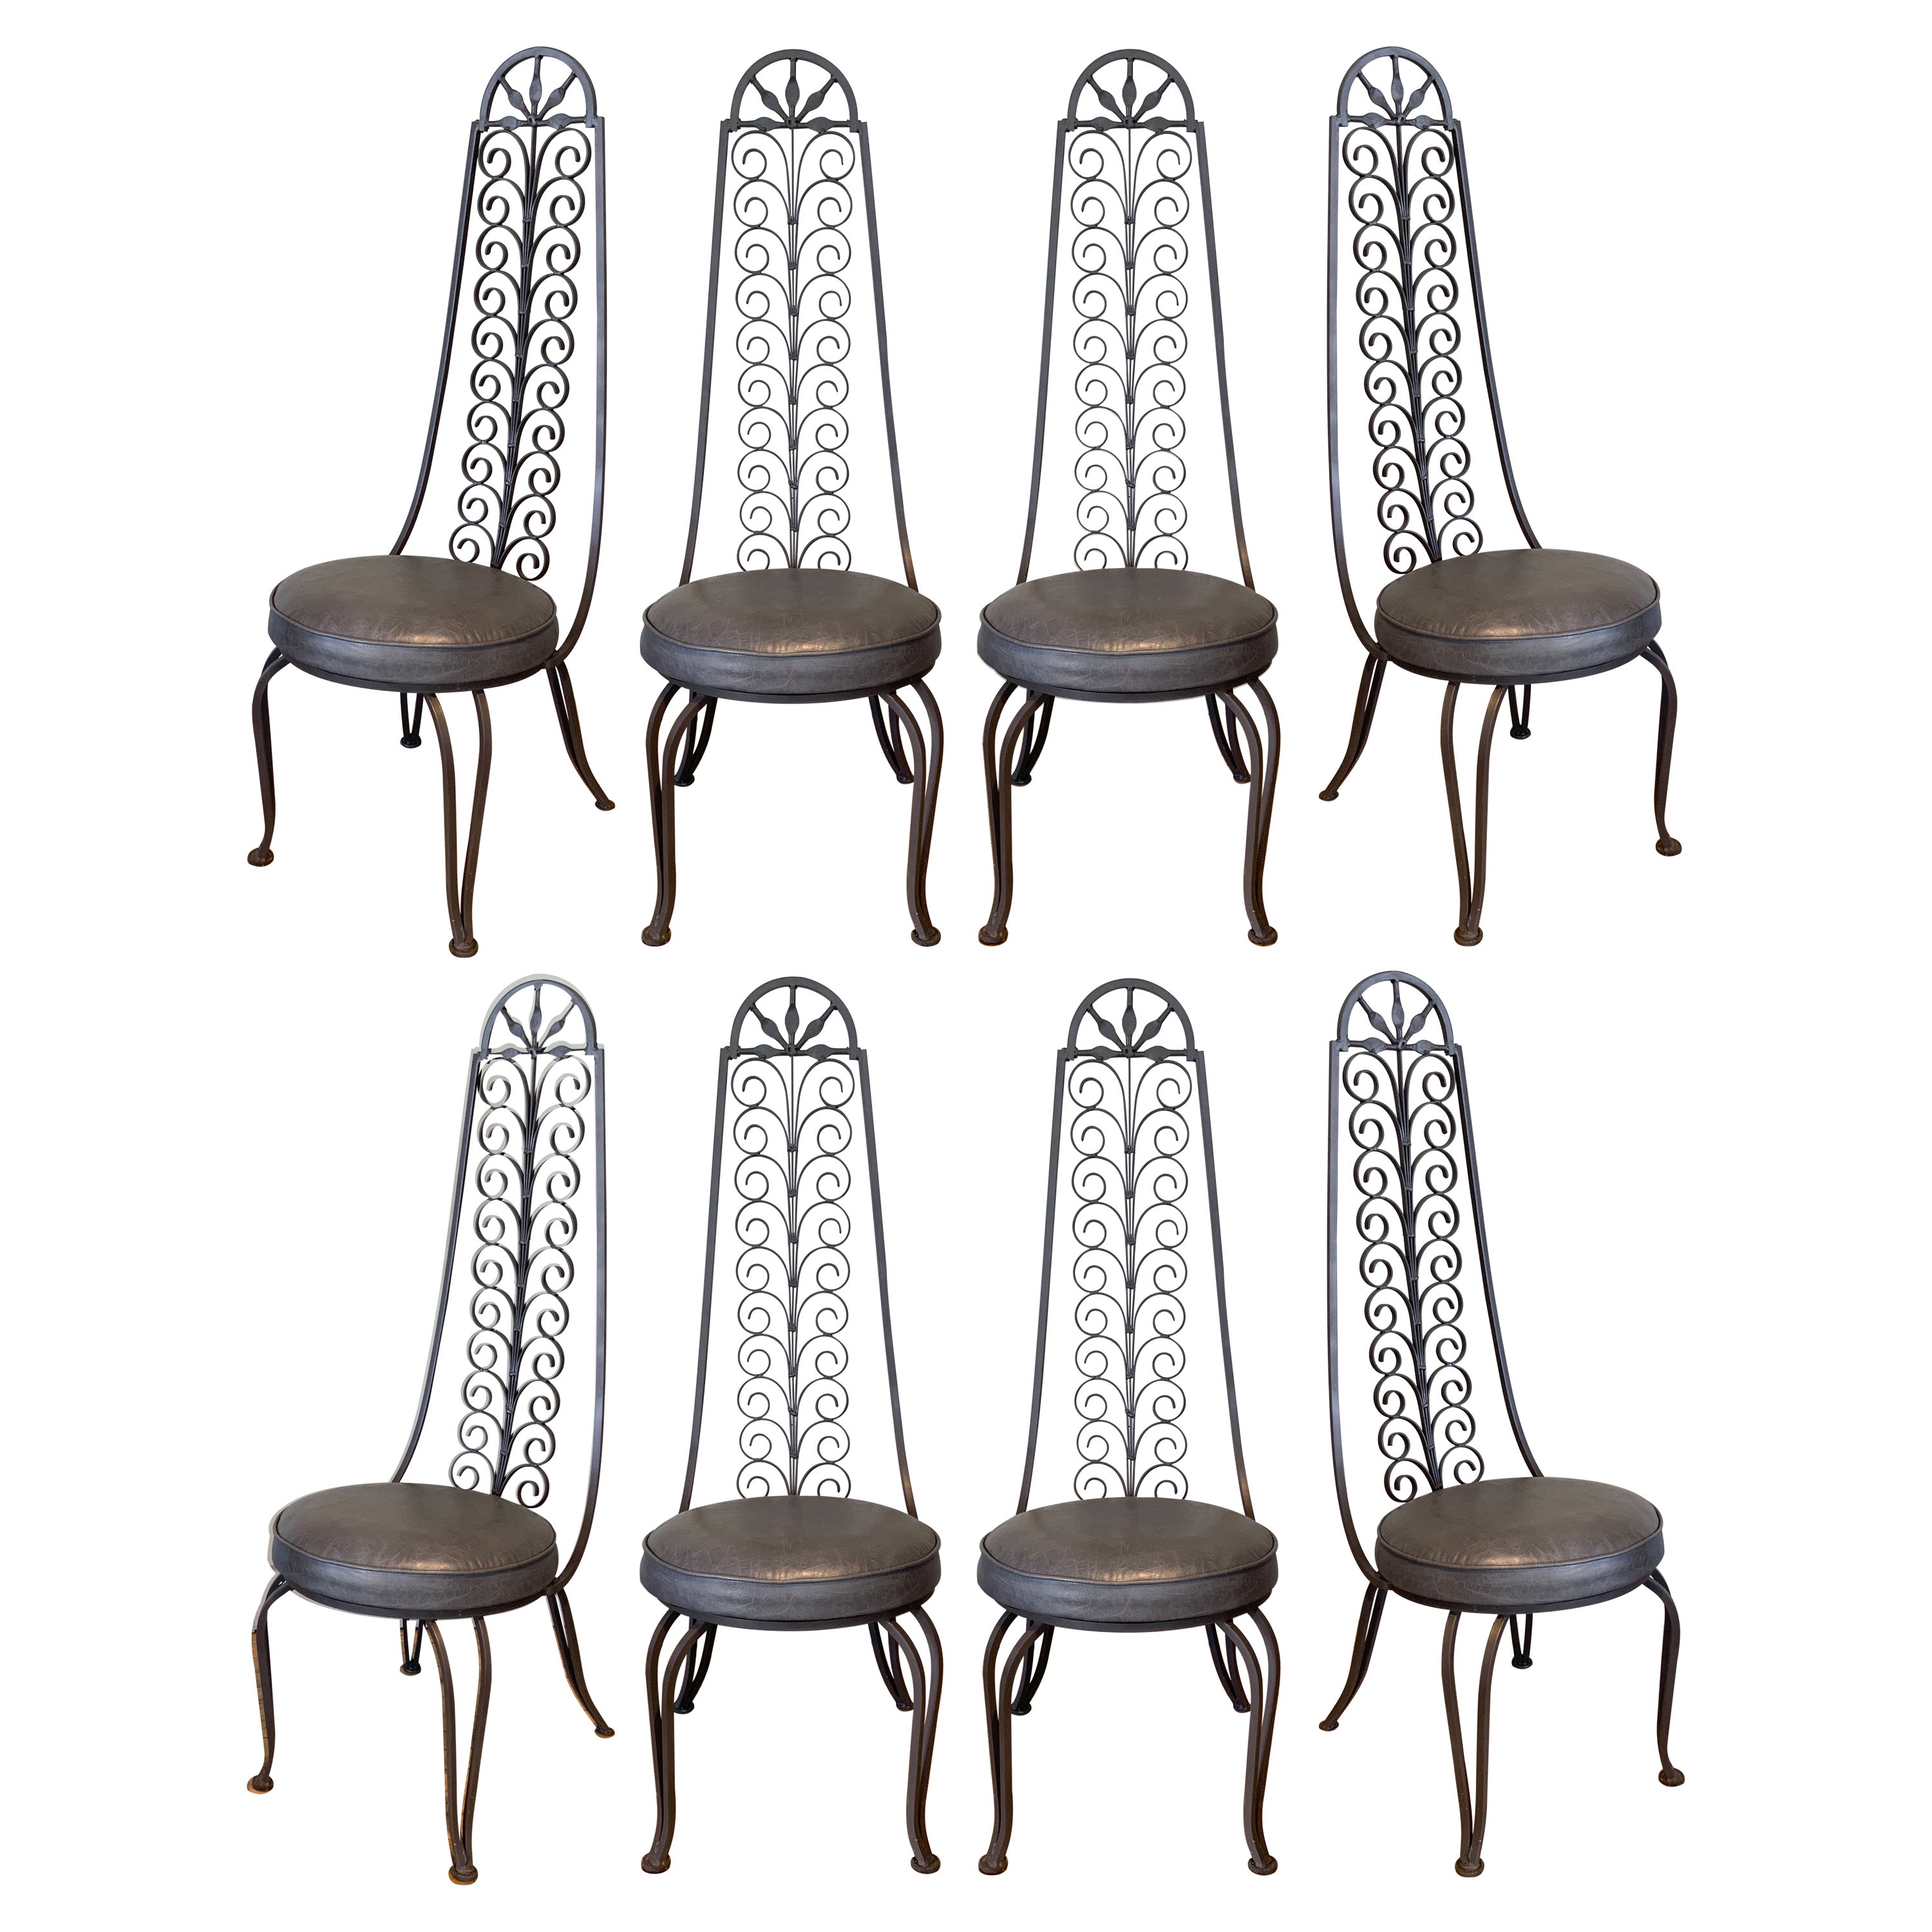 Set of Eight Wrought Iron High Back Dining Chairs